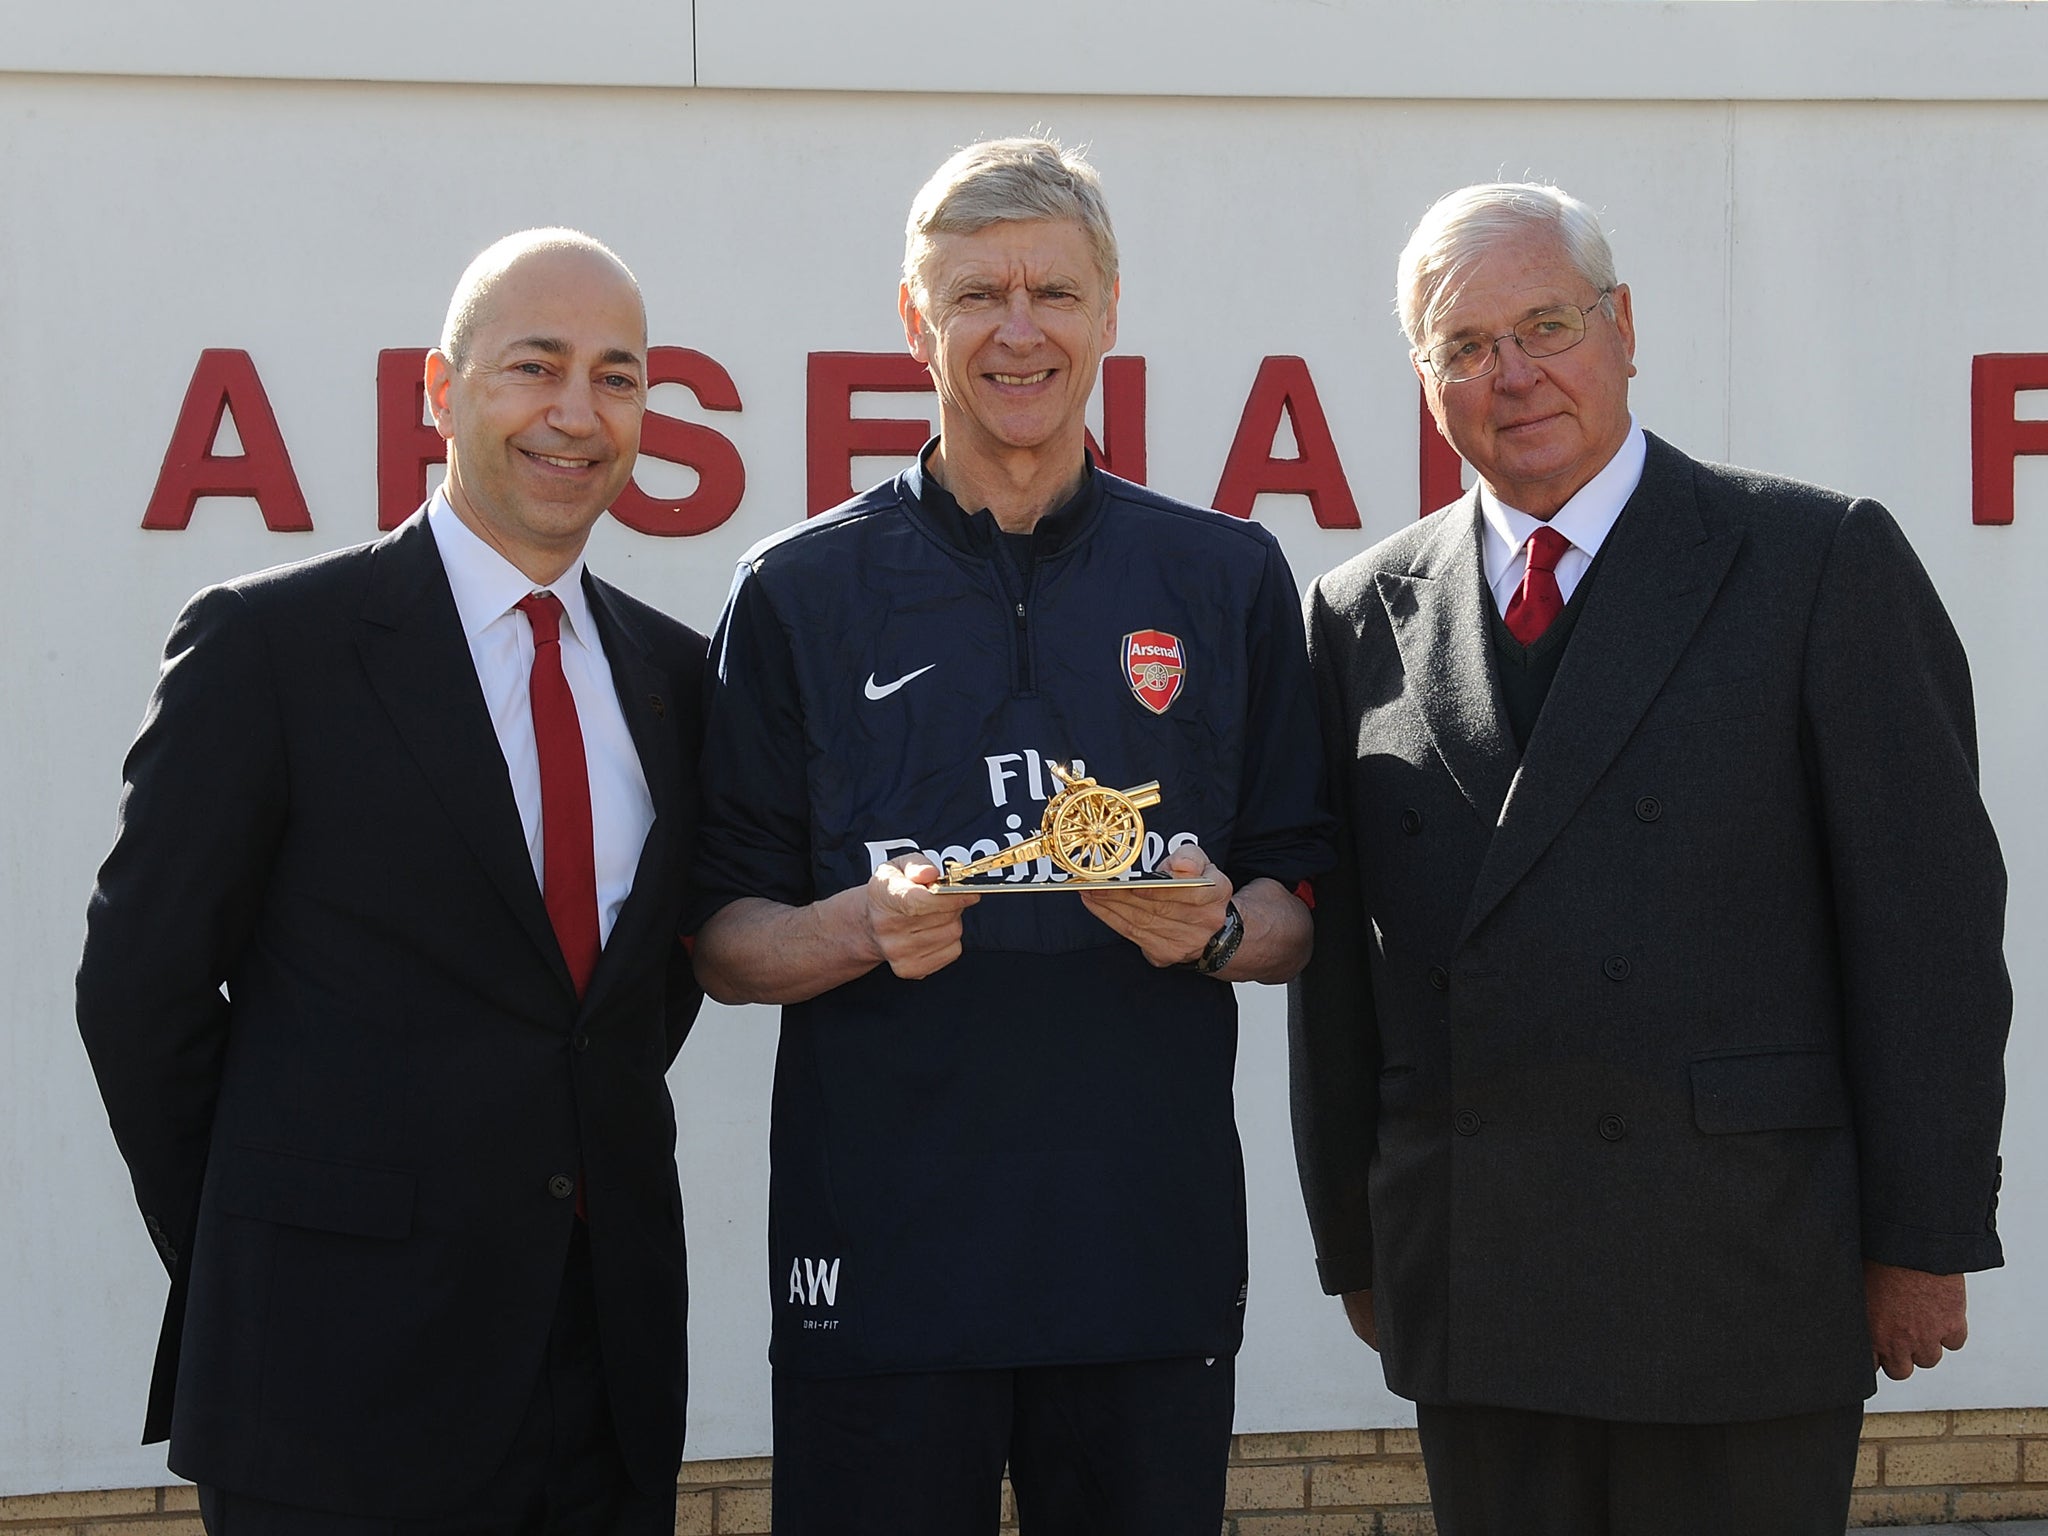 Chairman Sir Chips Keswick and CEO Ivan Gazidis present Arsene Wenger with a gold cannon to commemorate his 1000th game as Arsenal manager at London Colney